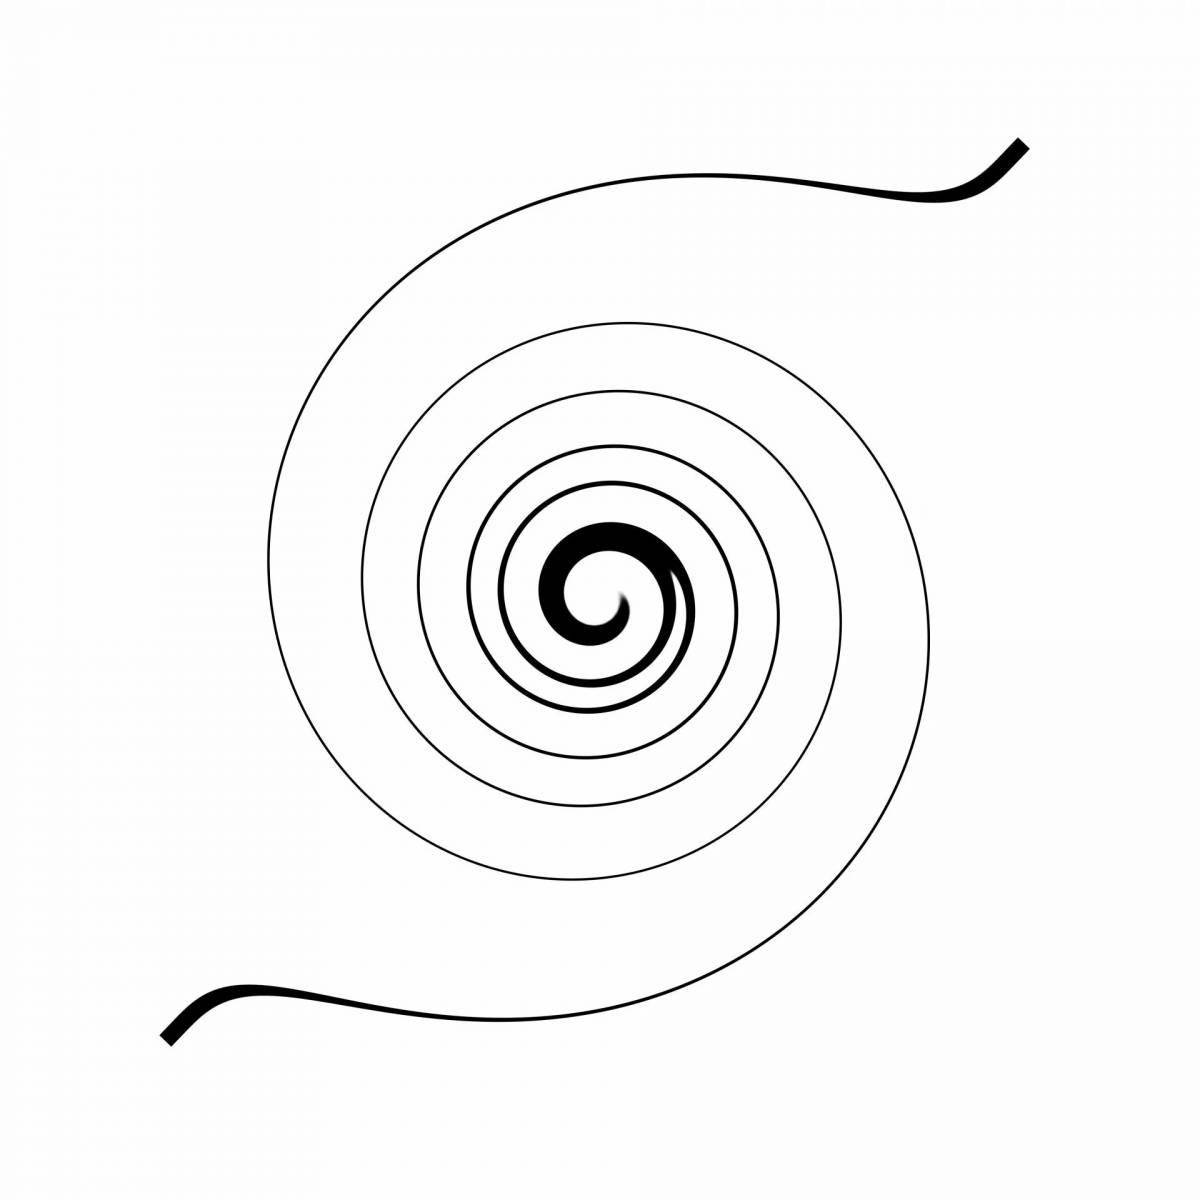 Exquisite spiral lines coloring book